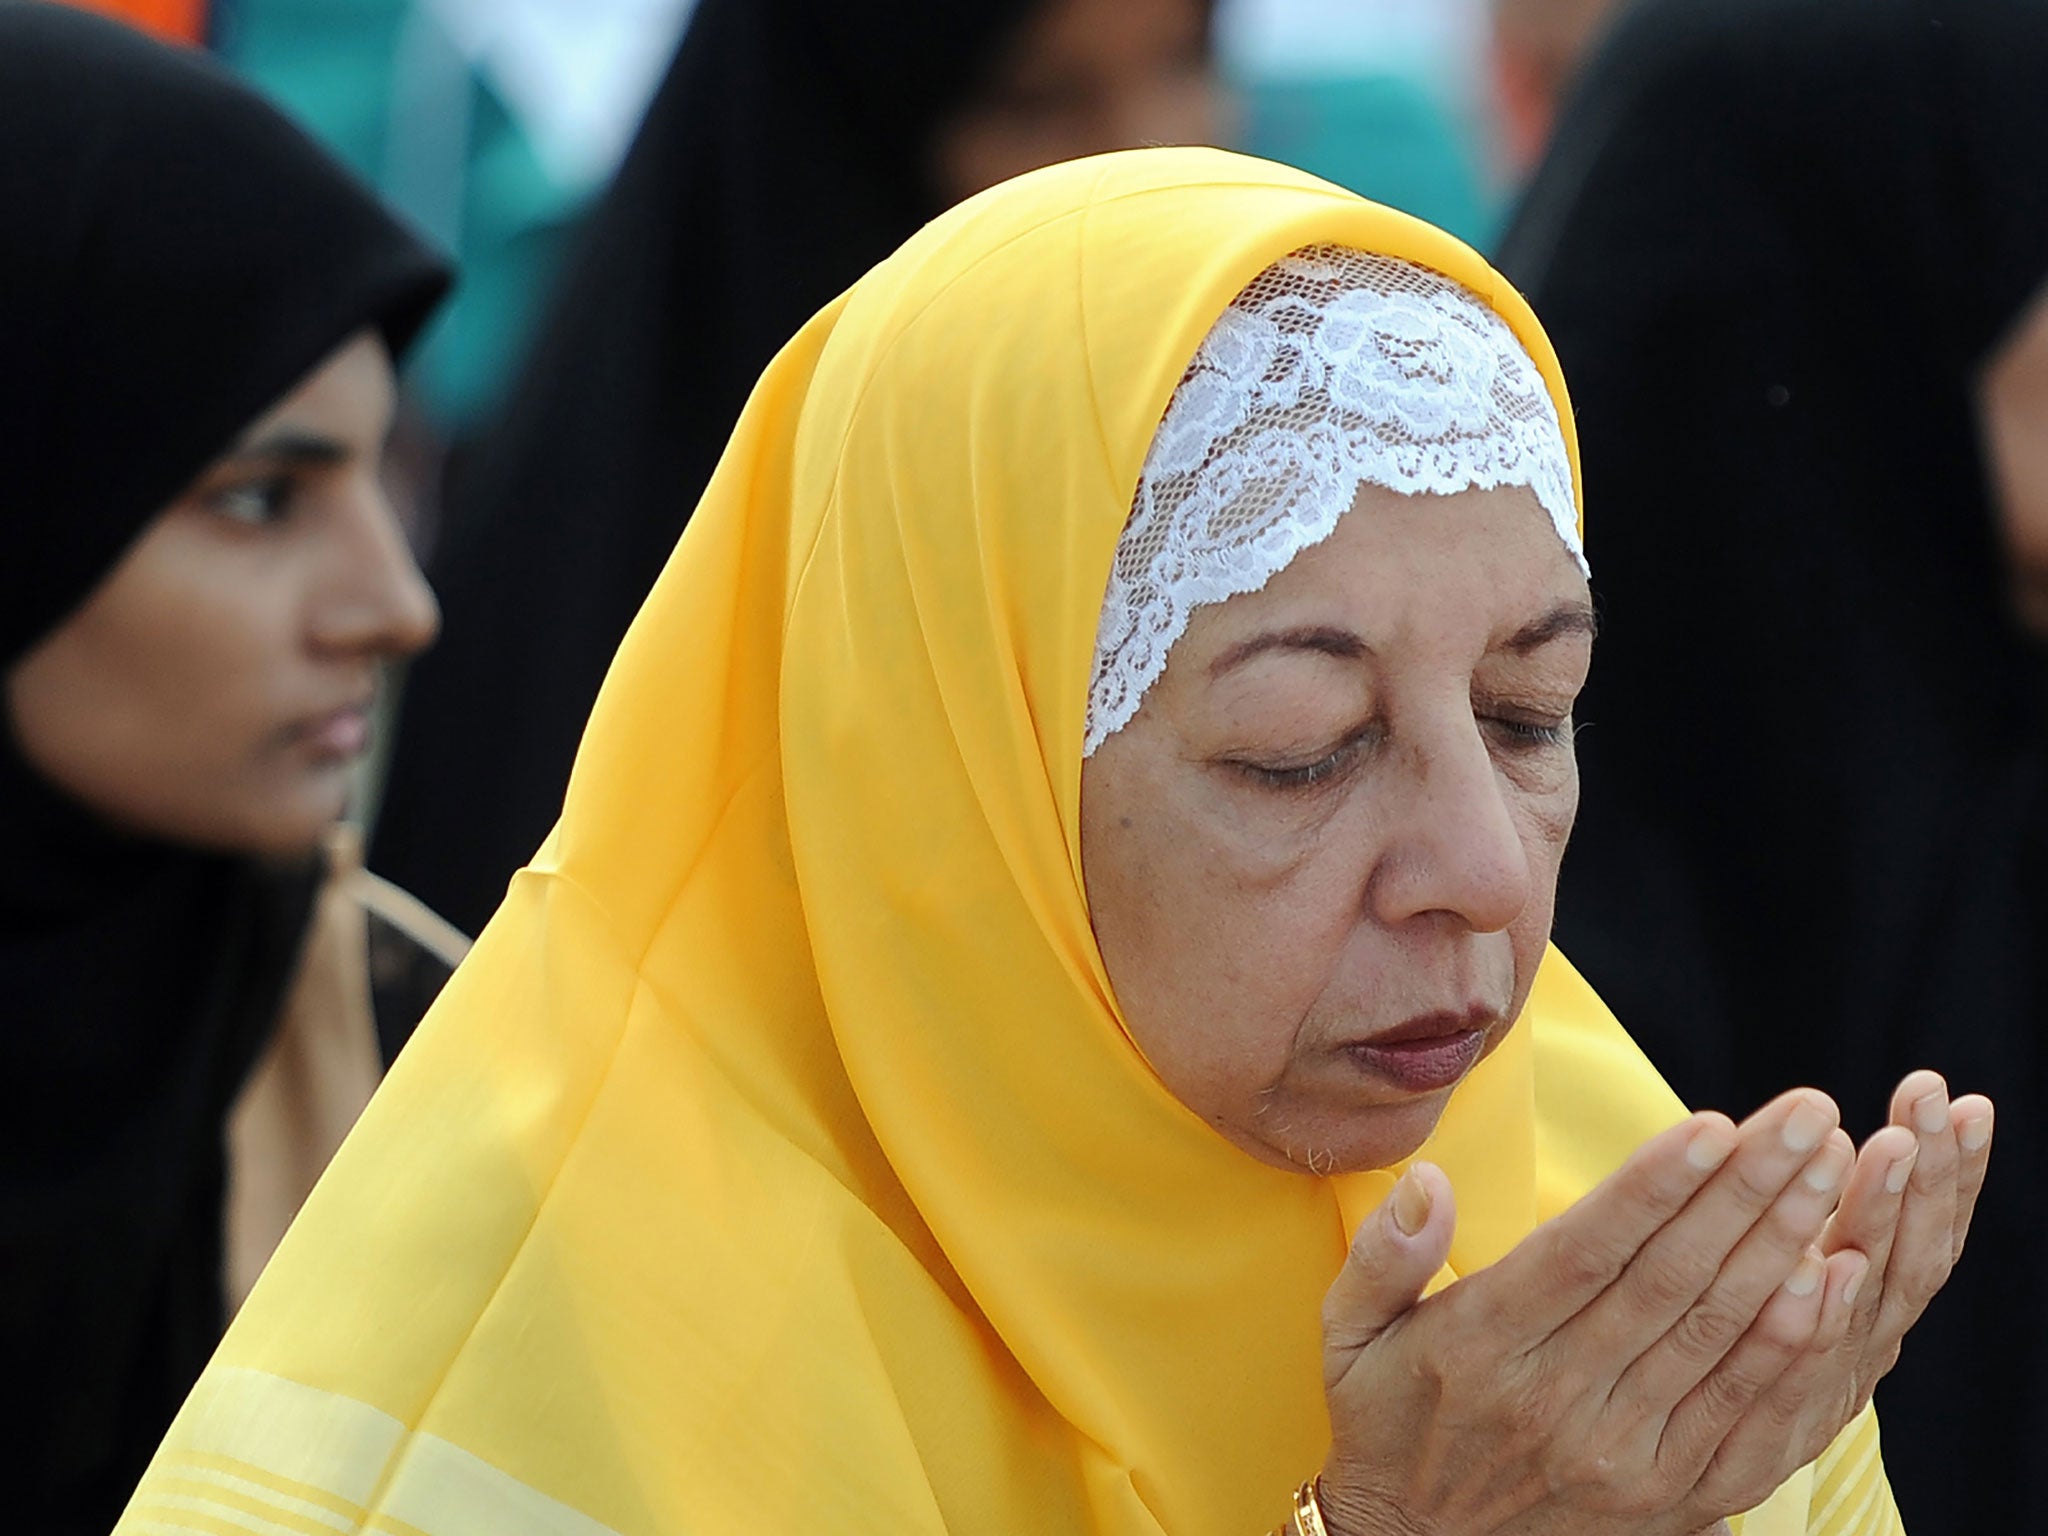 A Sri Lankan Muslim woman prays during Eid Al-Adha celebrations at the Galle Face esplanade in Colombo on September 12, 2016.